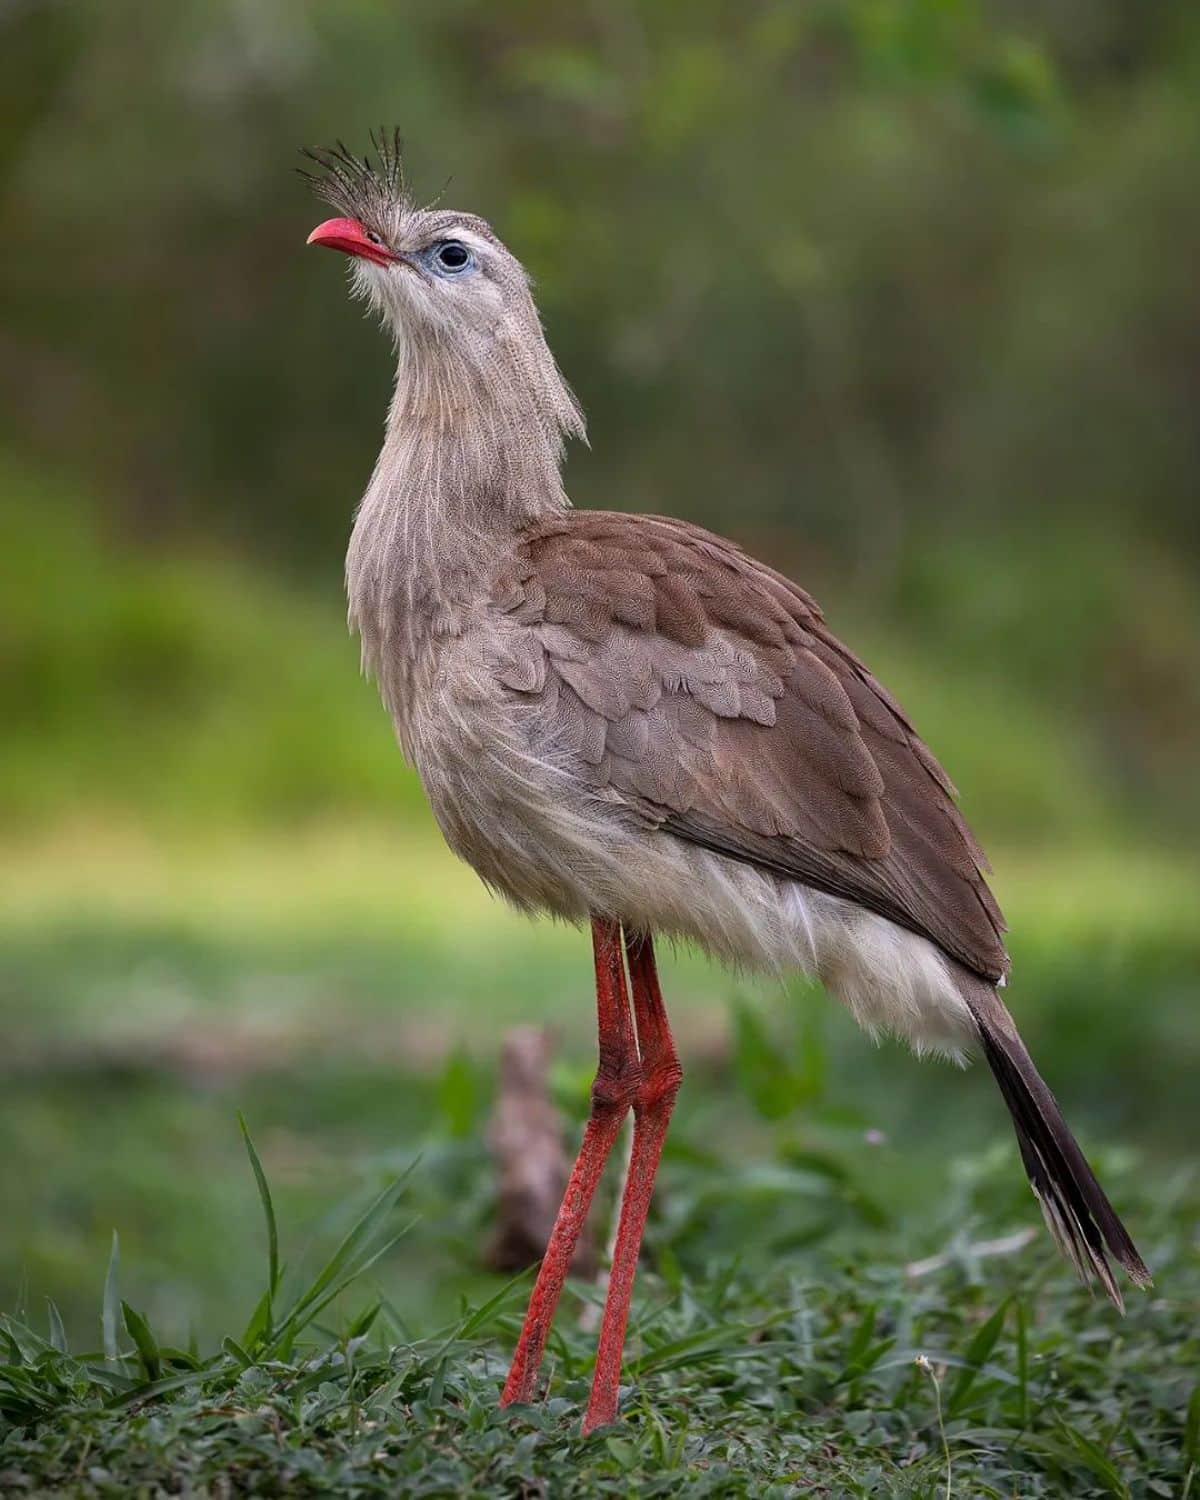 An adorable Red-Legged Seriema is standing on the ground.